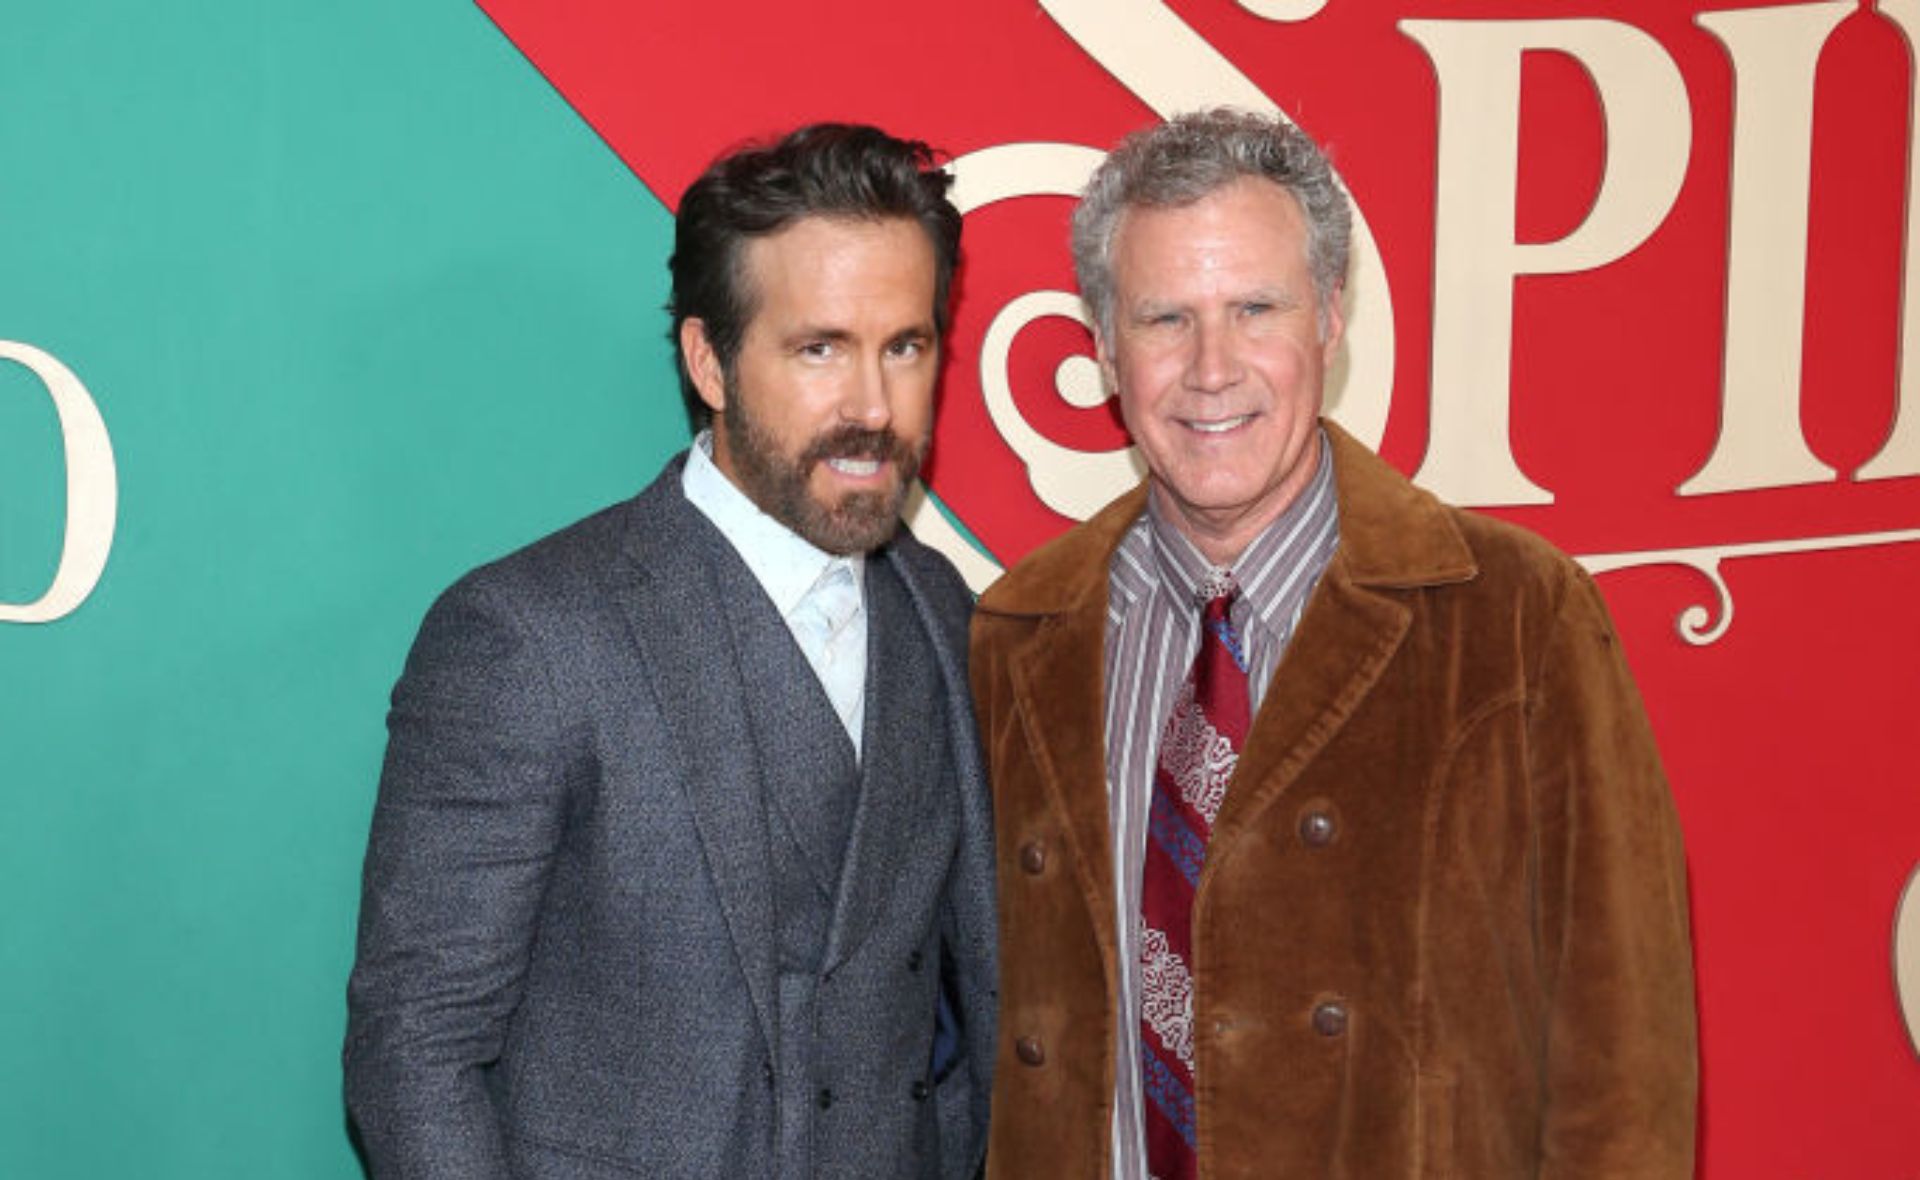 Ryan Reynolds reflects on family, football and working with the ‘surprising’ Will Ferrell